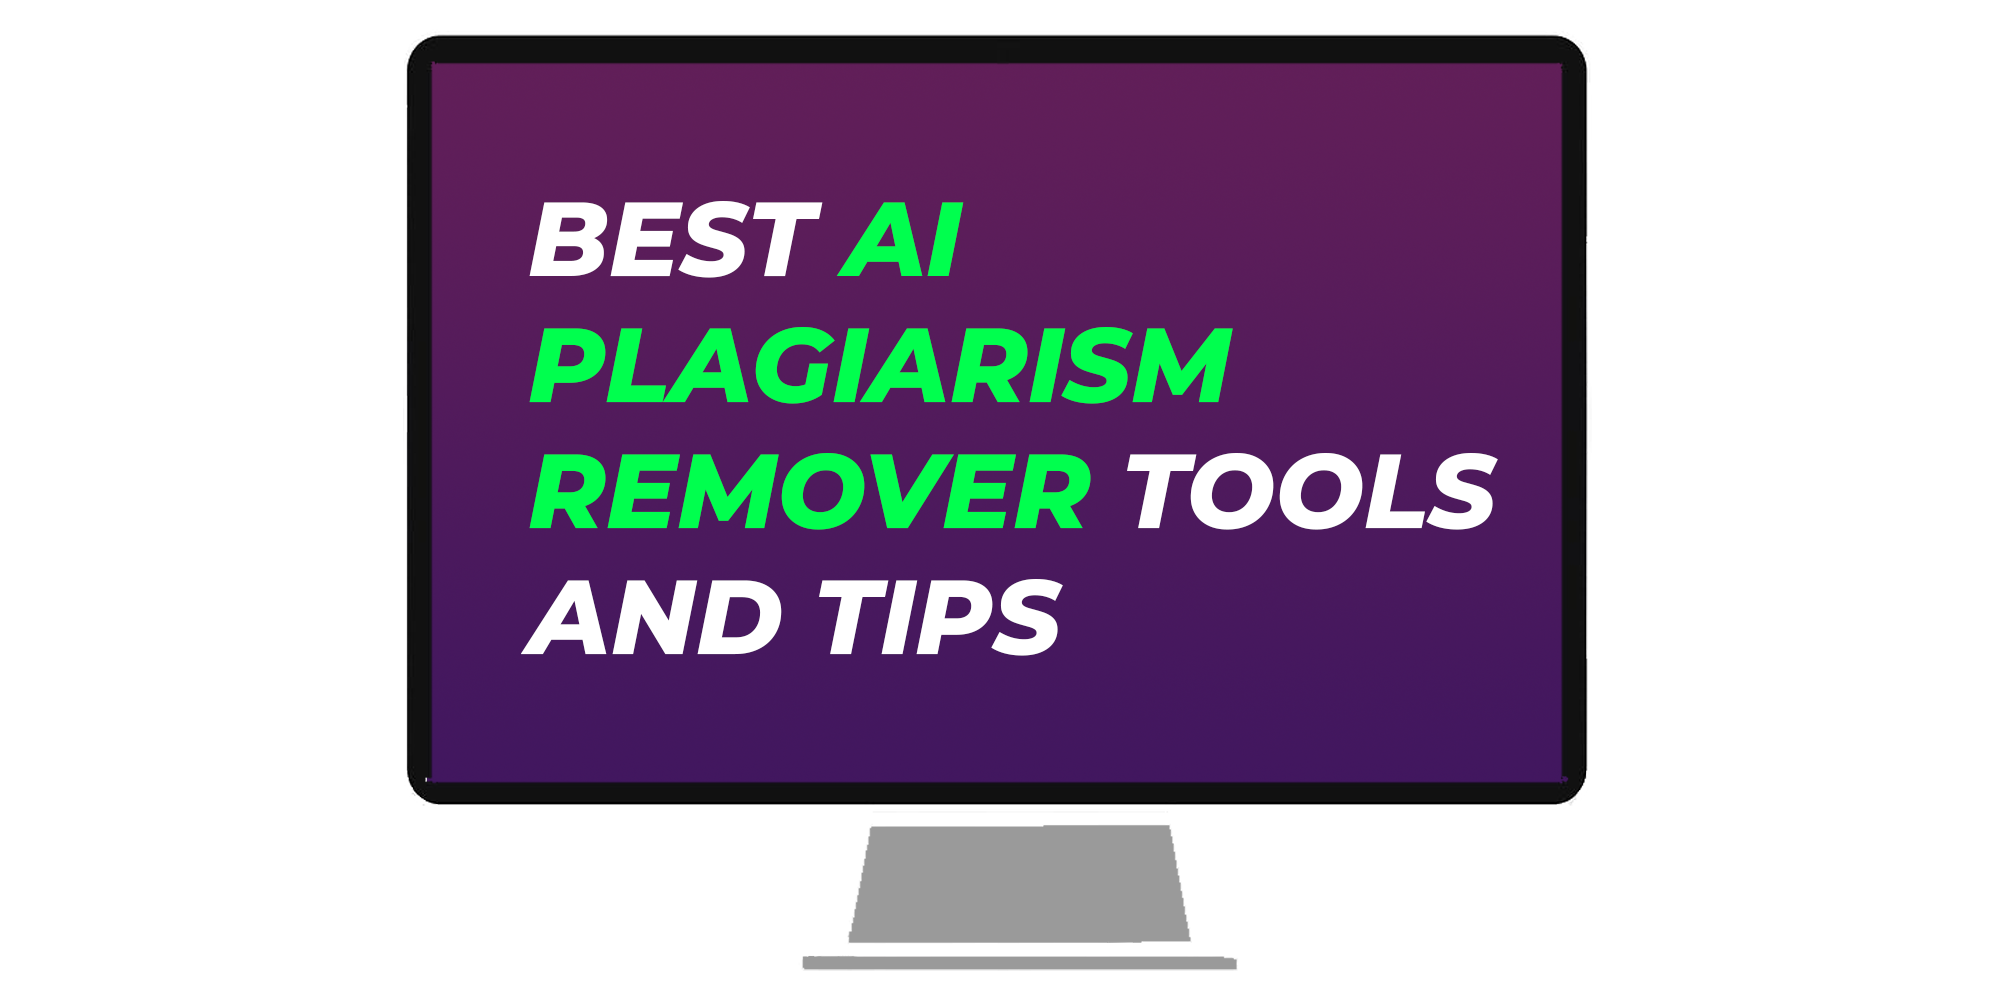 Best AI Plagiarism Remover Tools and Tips